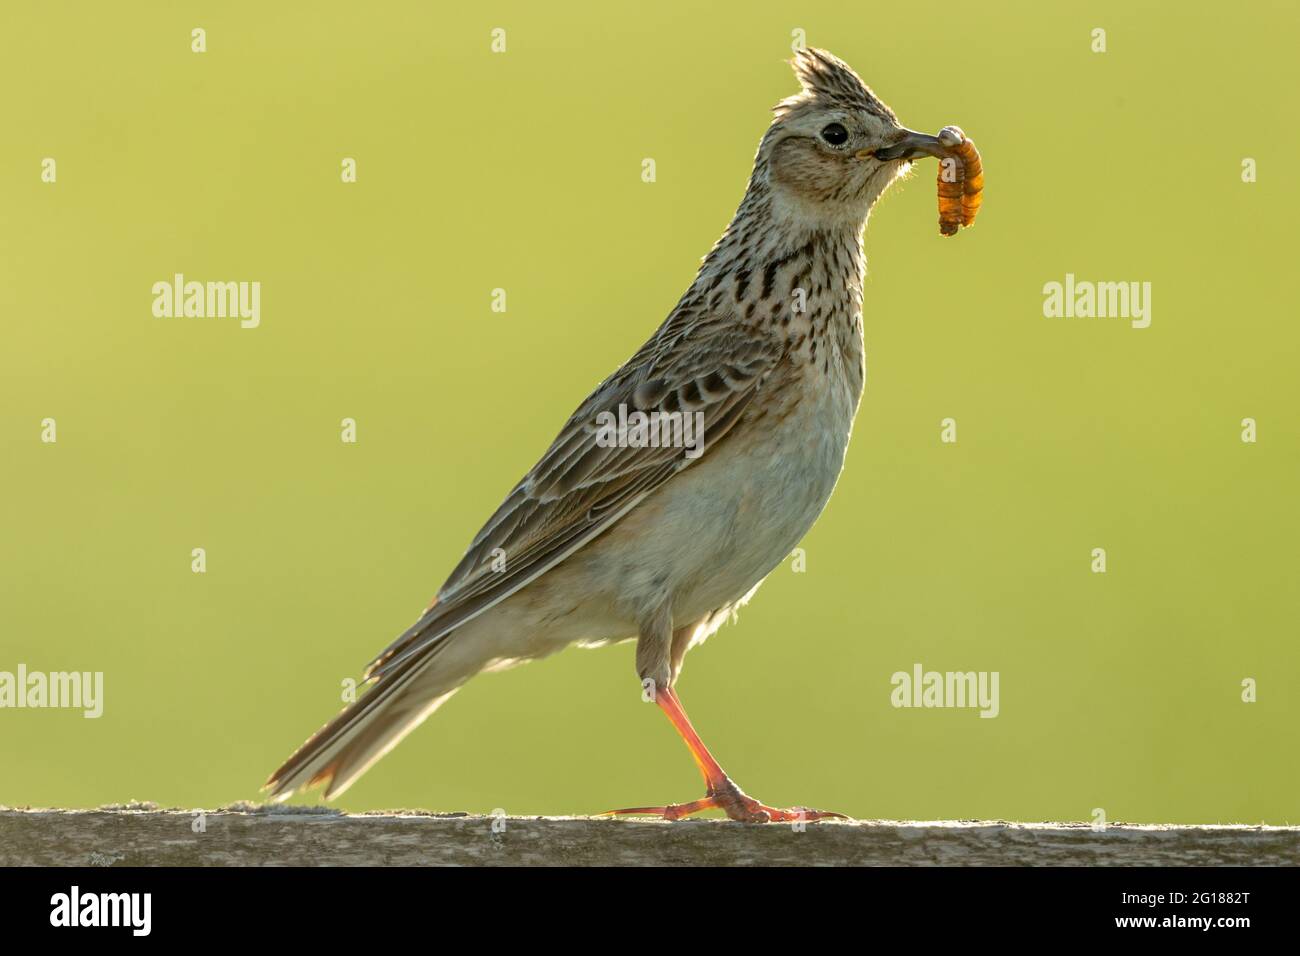 Skylark feeding on a Summer's evening.  Facing right with grubs in beak. Scientific name: Alauda arvensis. Backlit image and clean background.  Space Stock Photo